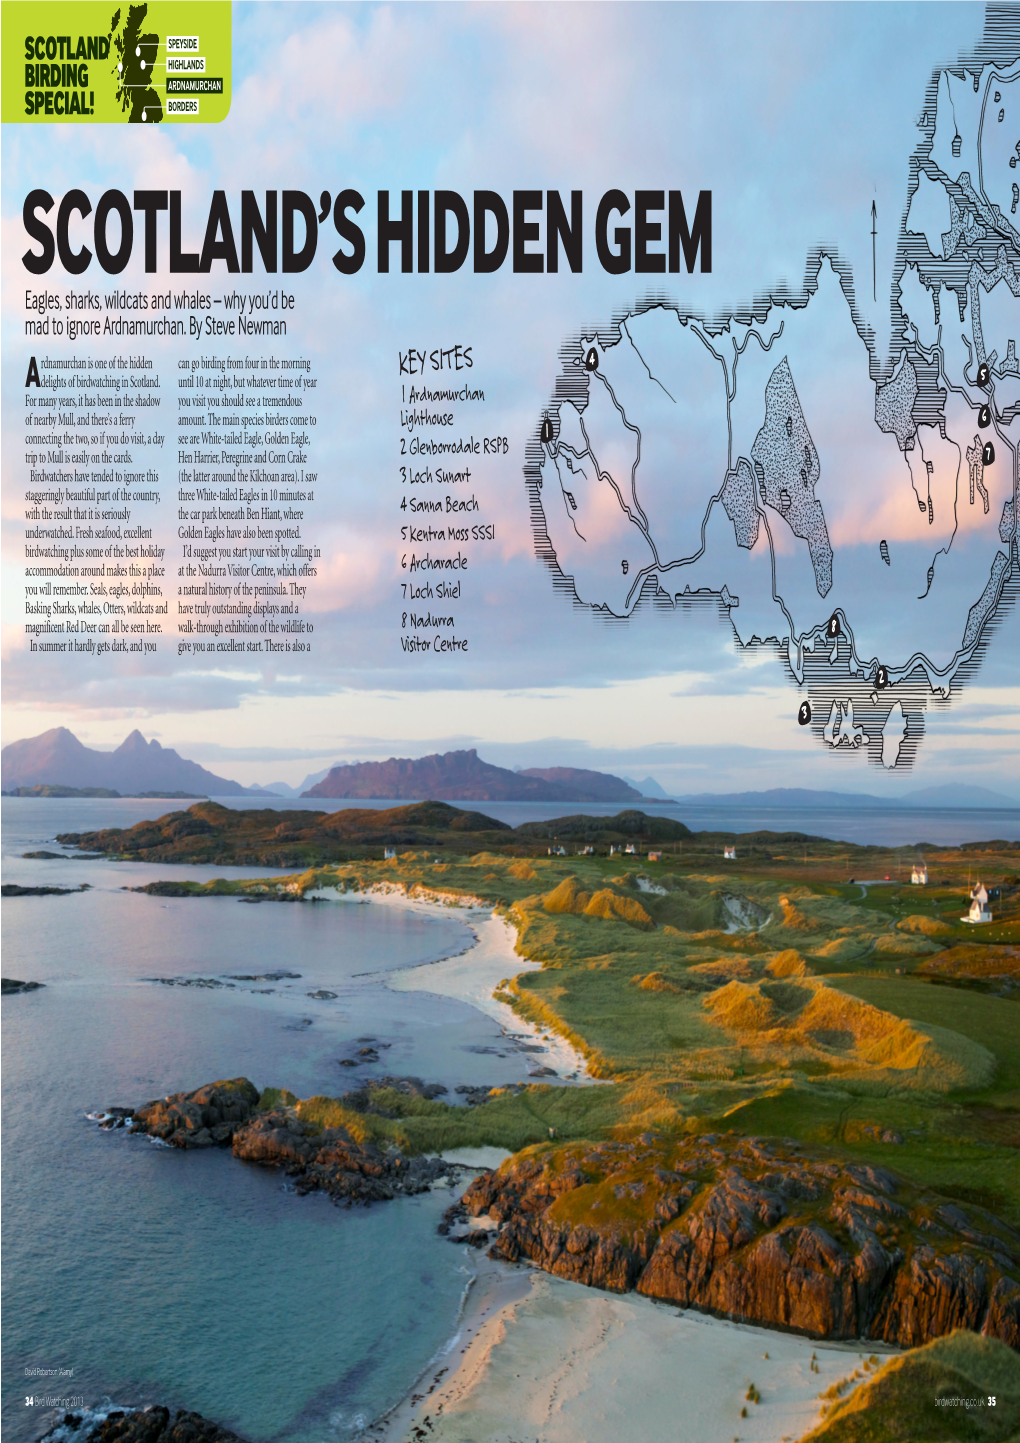 Published Are Article on Birdwatching on Ardnamurchan